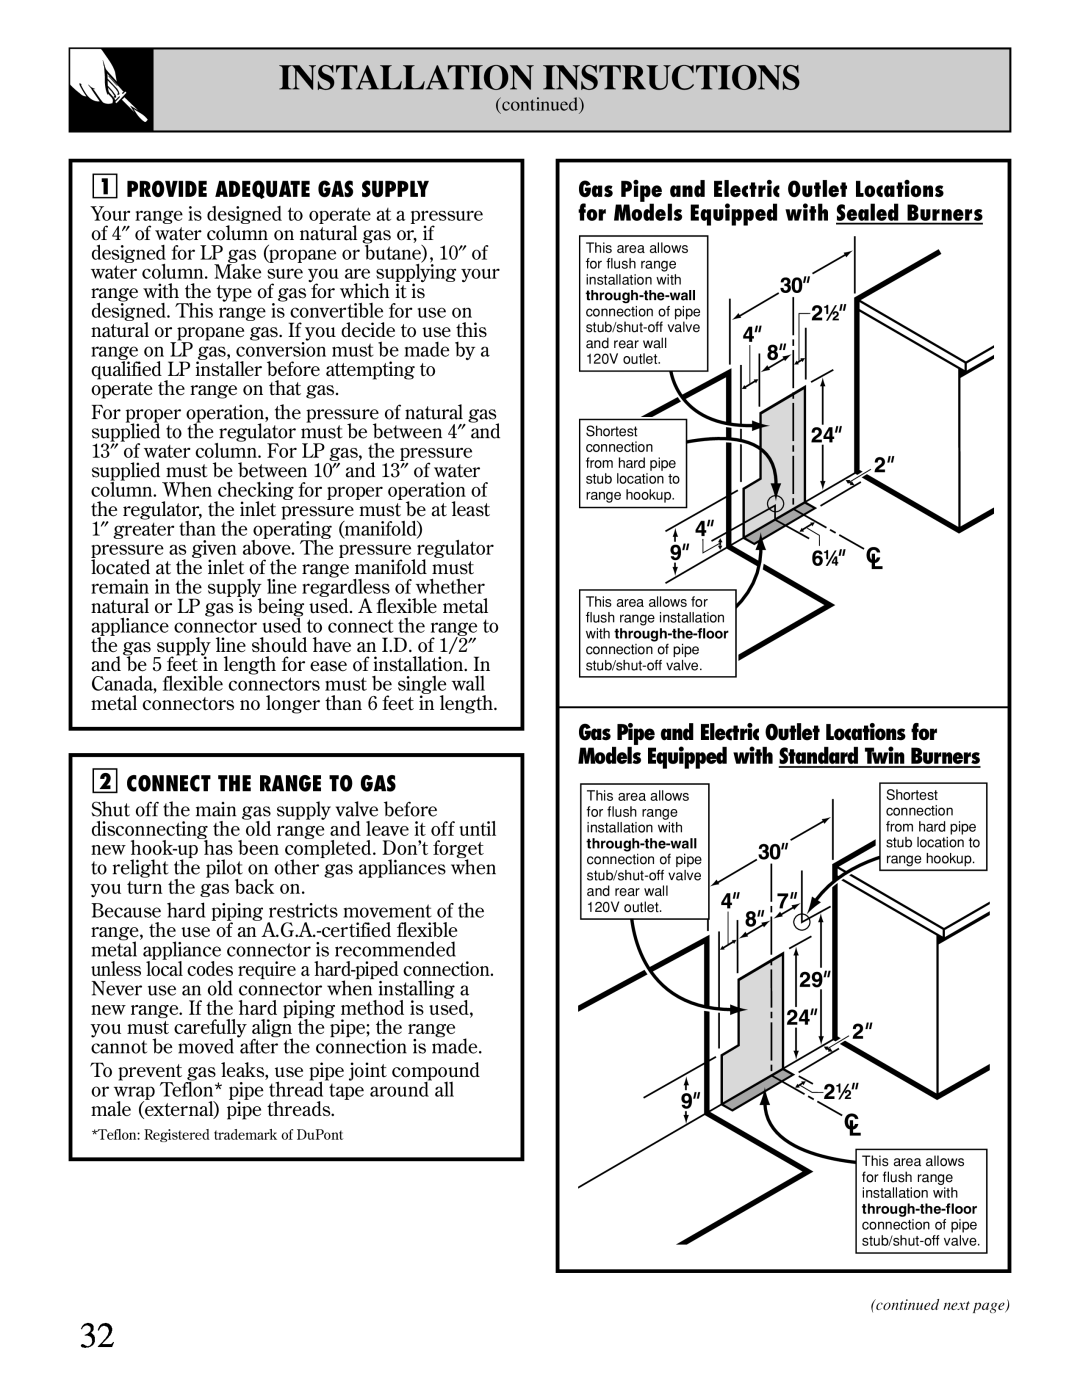 GE XL44 manual Installation Instructions, Provide Adequate Gas Supply, Connect The Range To Gas 